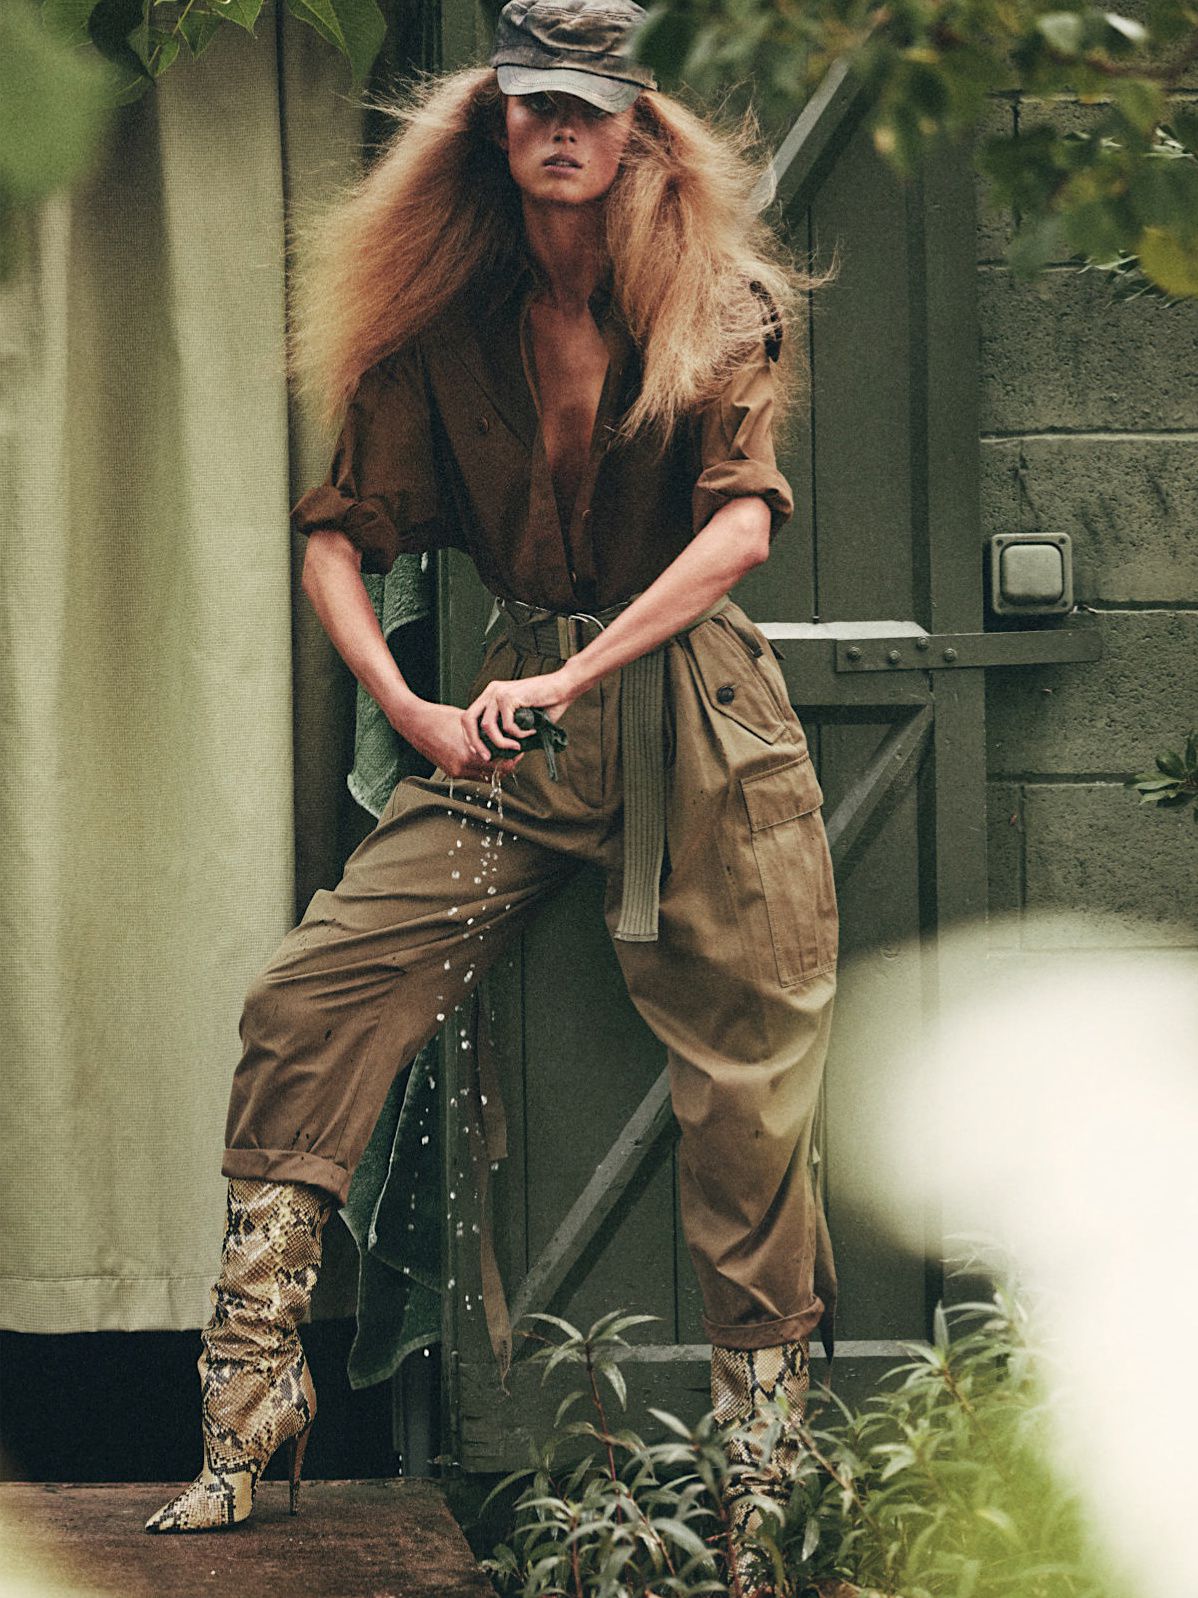 Vogue Paris Rianne Van Rompaey In Military Outfit HD Image On